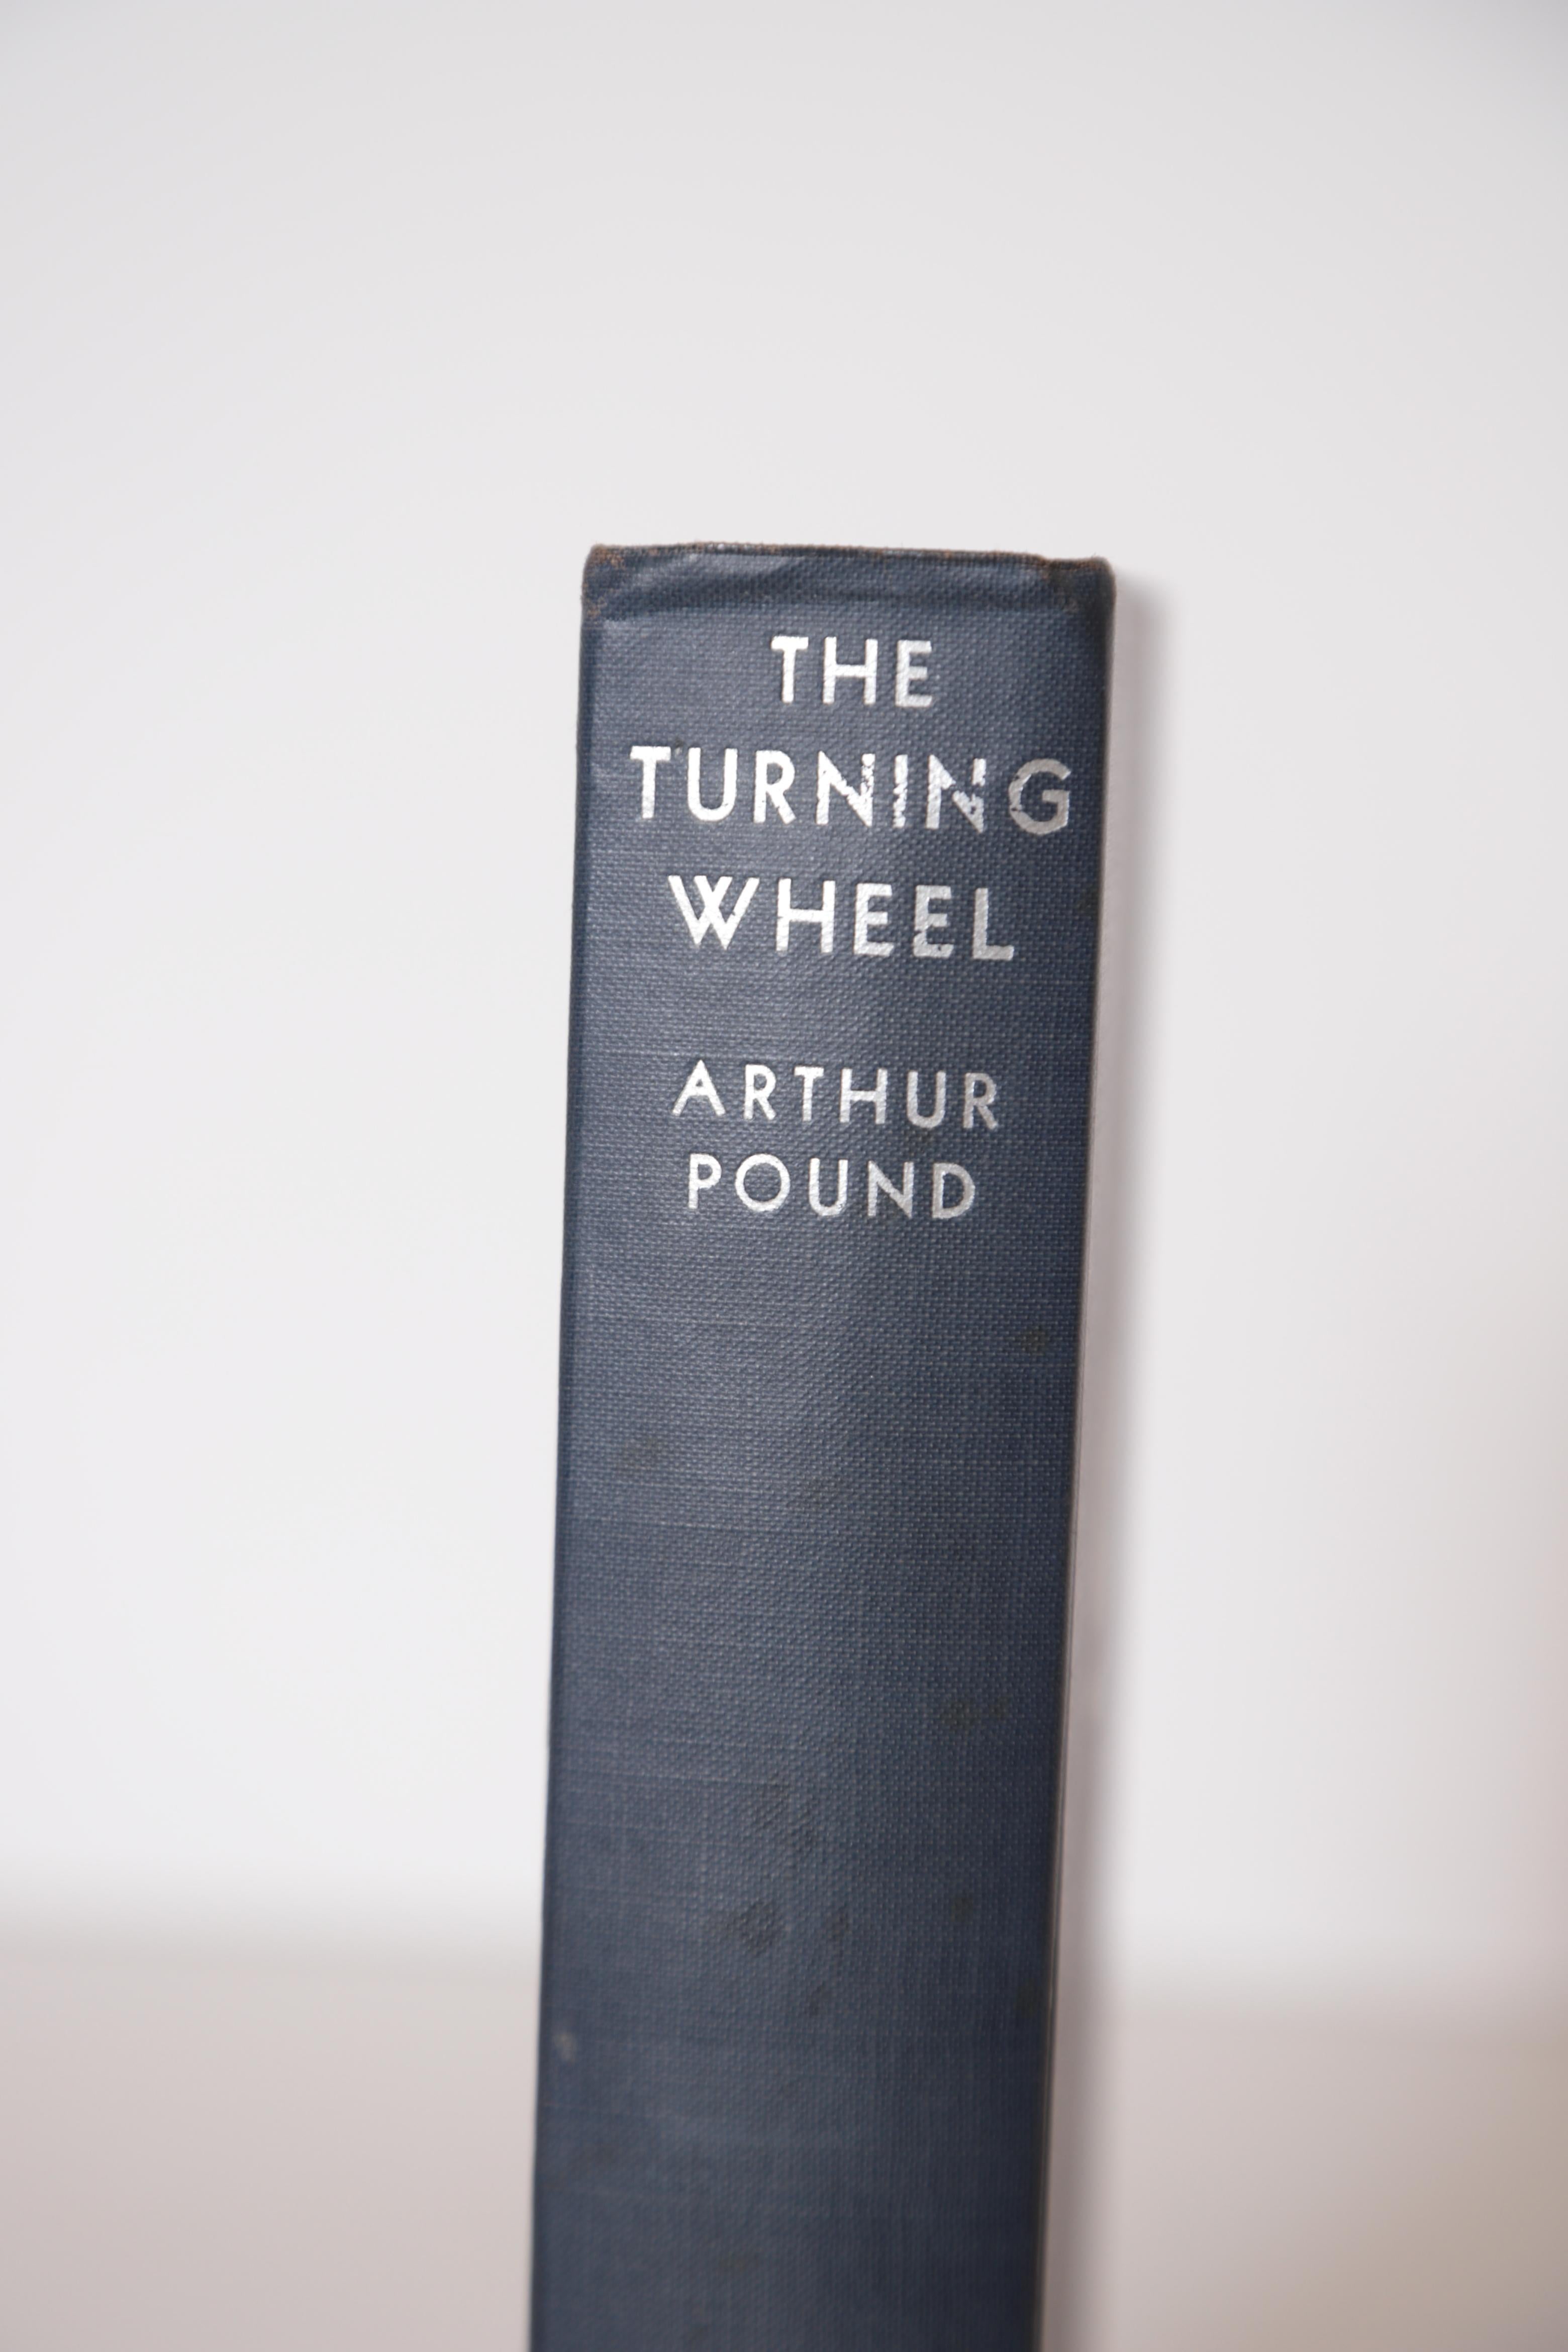 Mid-20th Century Machine Age Art Deco Norman Bel Geddes Book, General Motors Turning Wheel, Pound For Sale